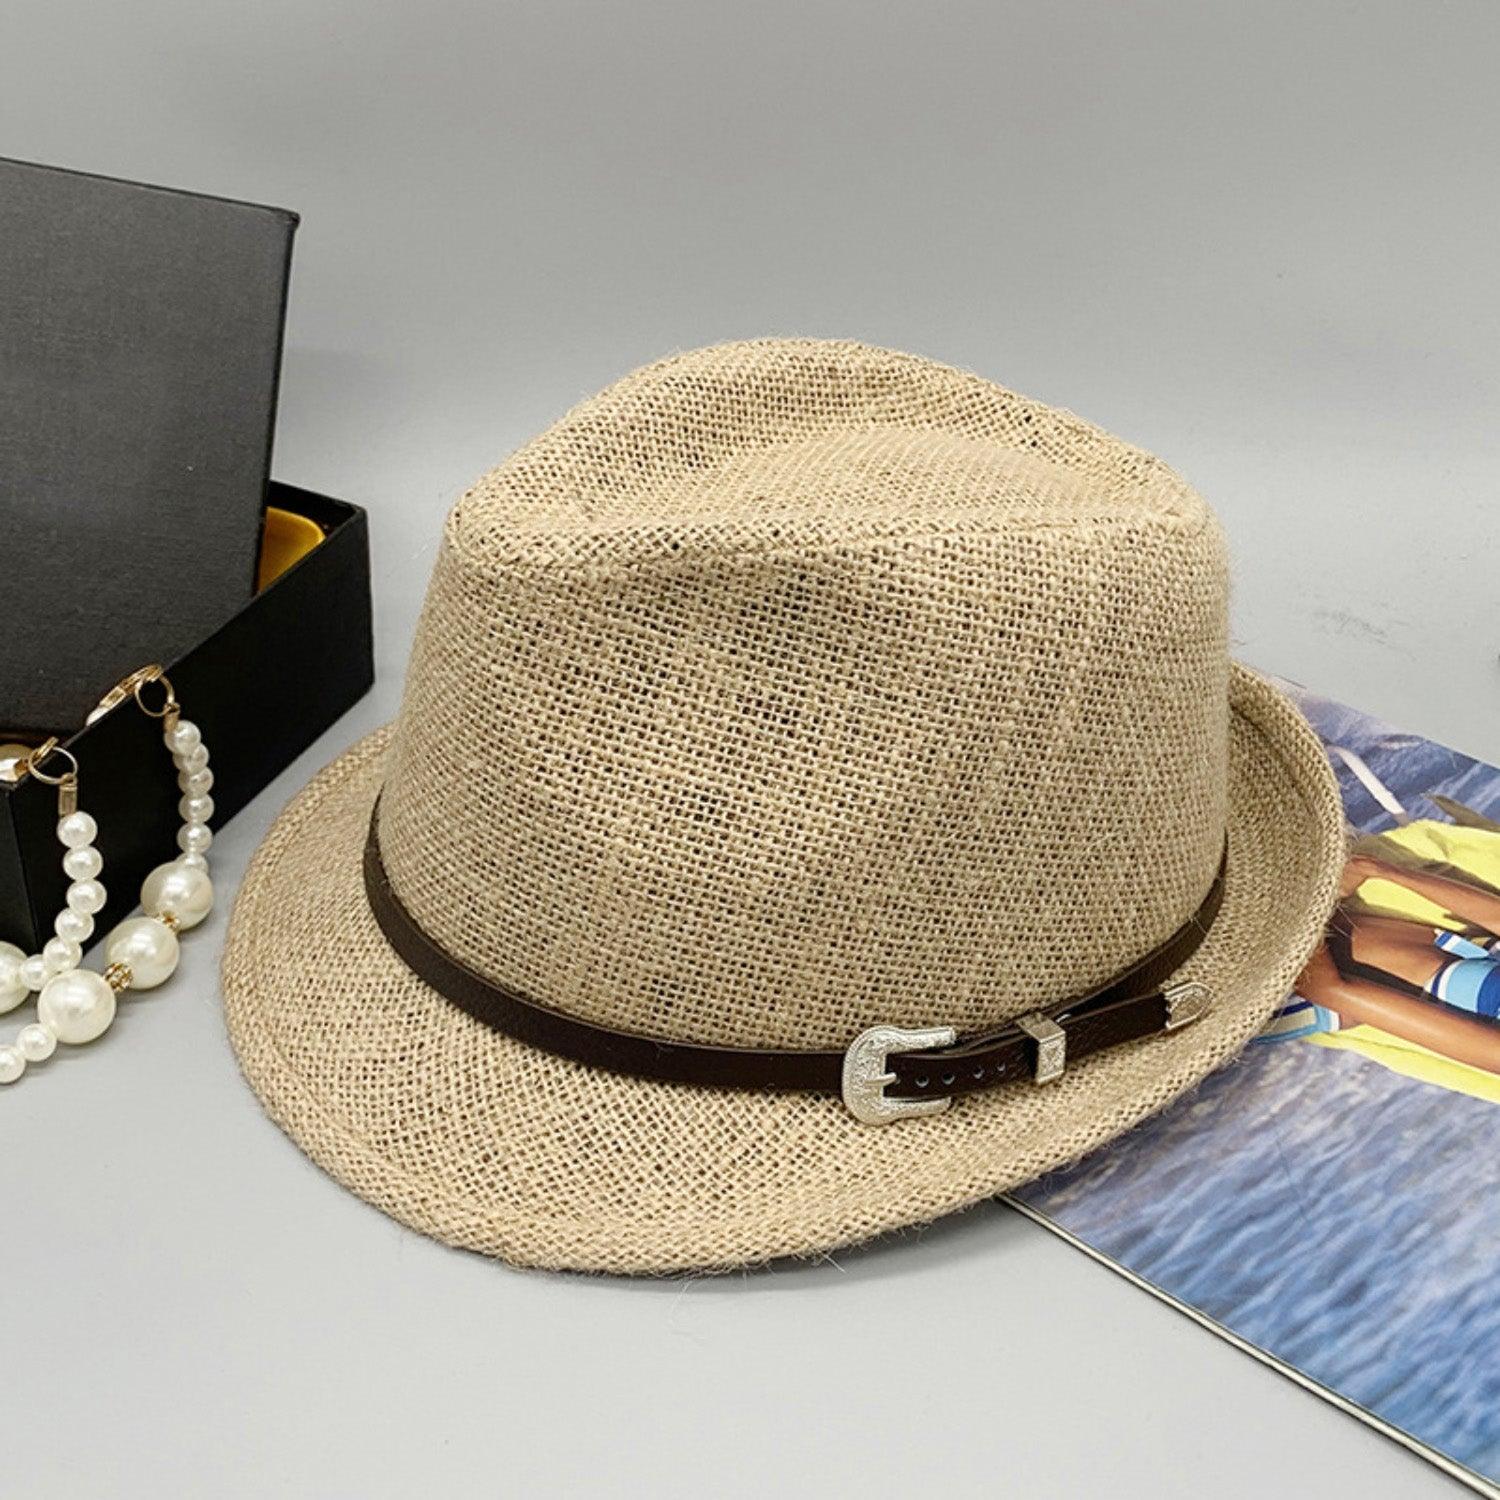 a hat, necklace, and book on a table